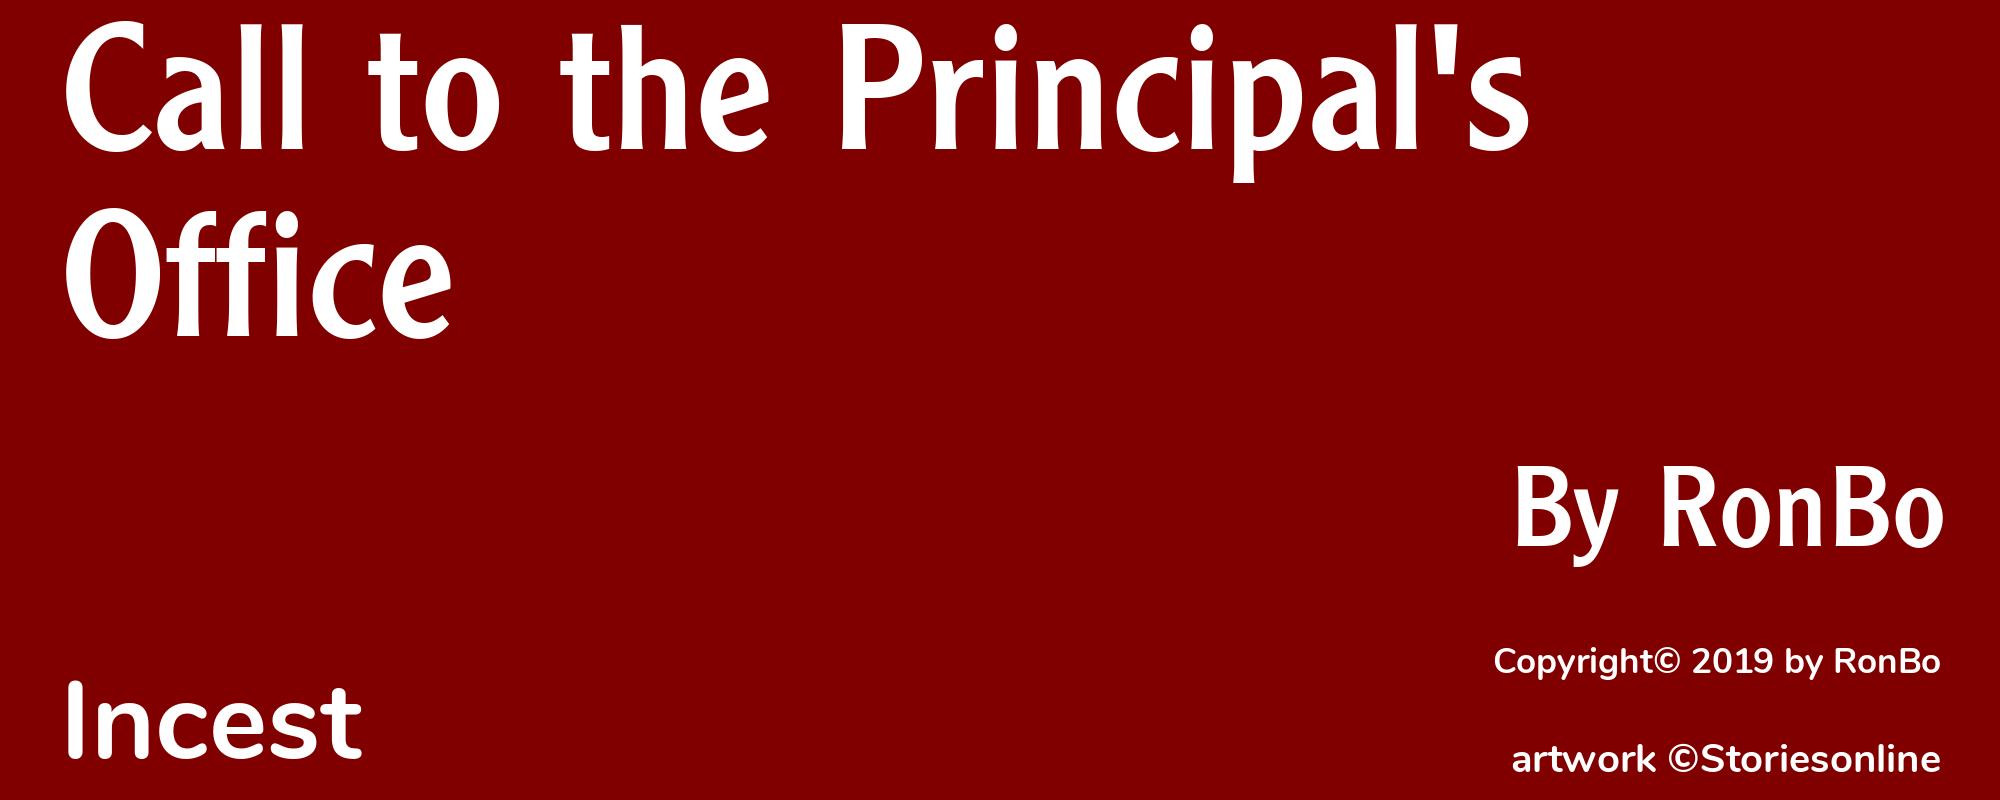 Call to the Principal's Office - Cover